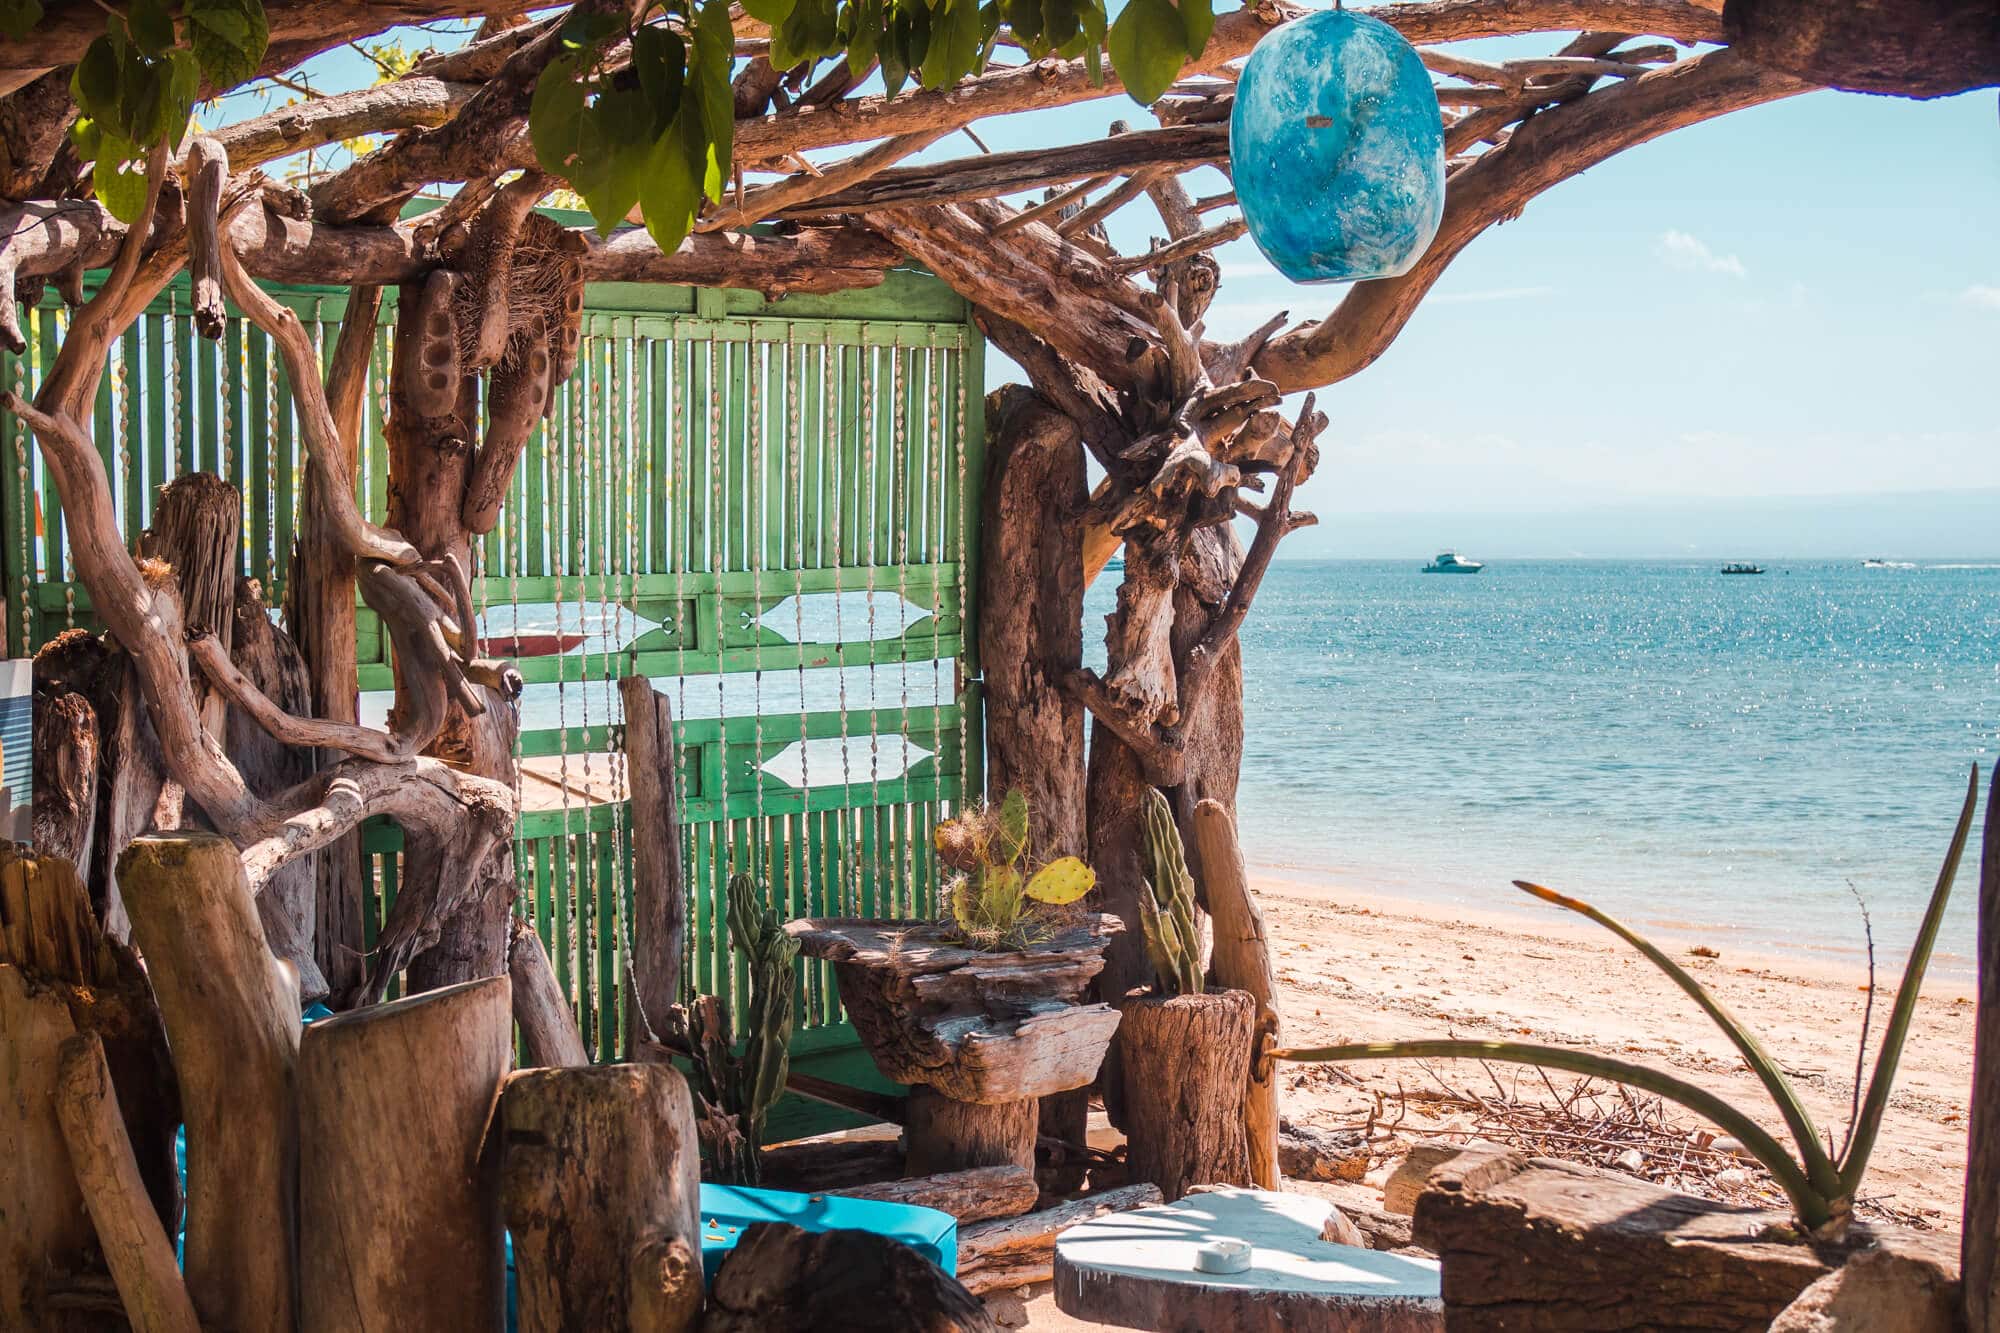 Boho drift wood seating area at Agung Beach Club up by the Mangrove Forest, perfect for a day trip to Nusa Lembongan.